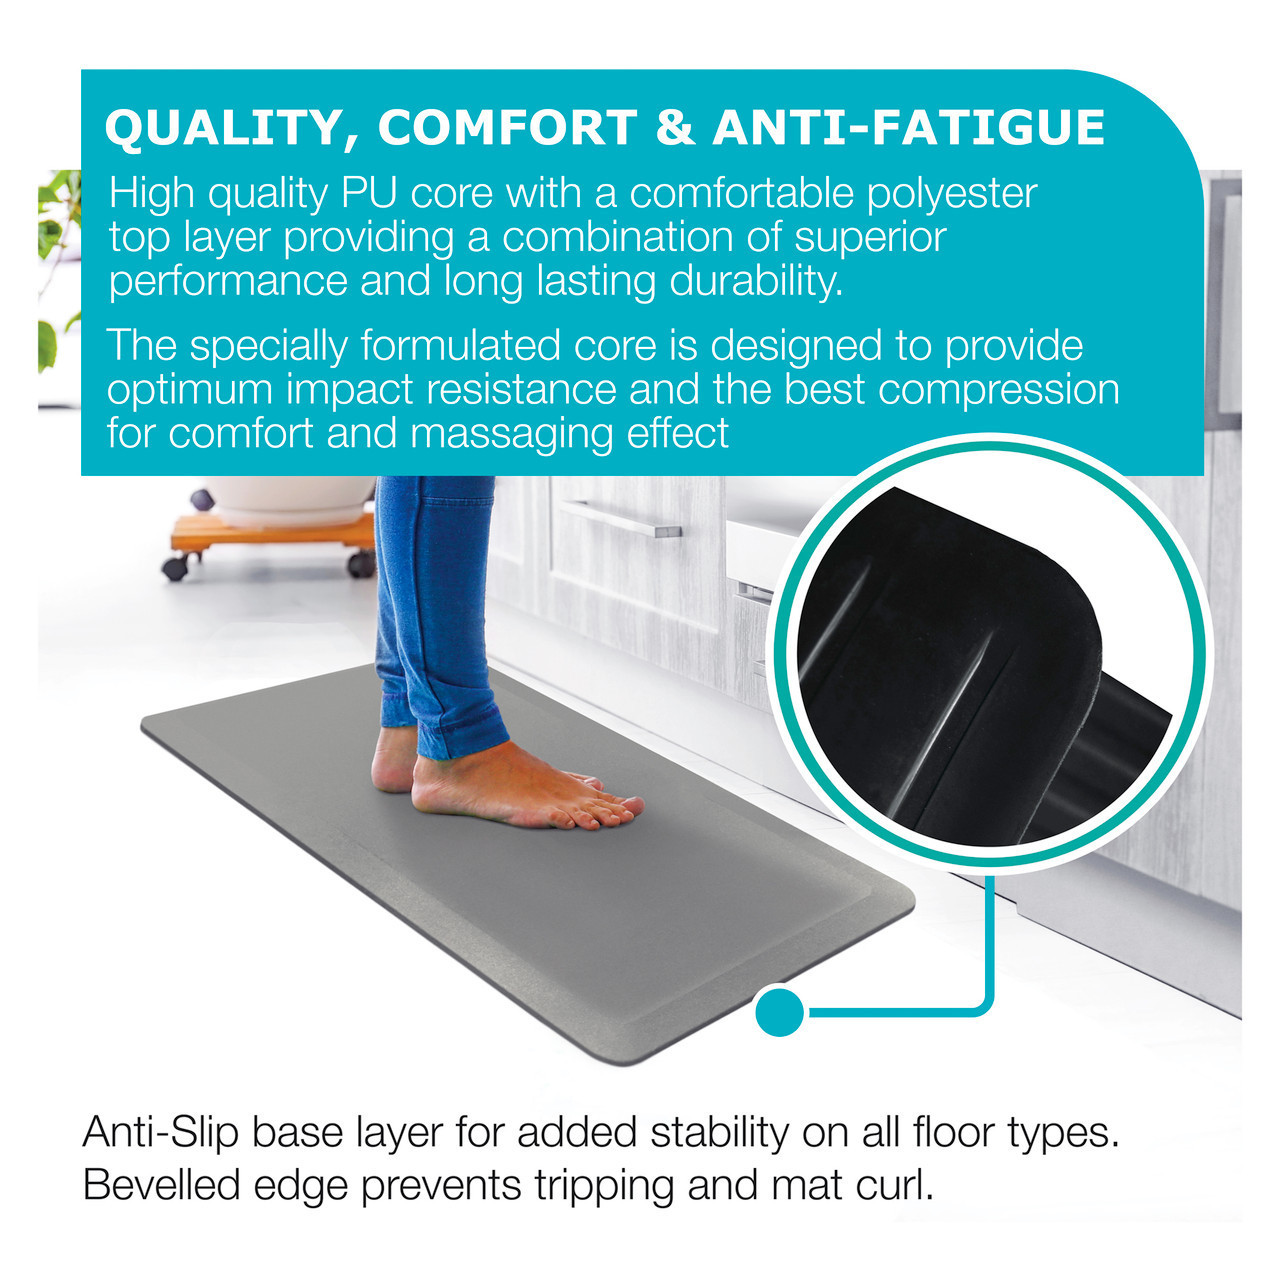 https://cdn11.bigcommerce.com/s-fjwps1jbkv/images/stencil/1280x1280/products/329/3800/ultralux-premium-anti-fatigue-floor-comfort-mat-or-durable-ergonomic-multi-purpose-non-slip-standing-support-pad-or-34-thick-or-gray__95317.1688995111.jpg?c=2?imbypass=on